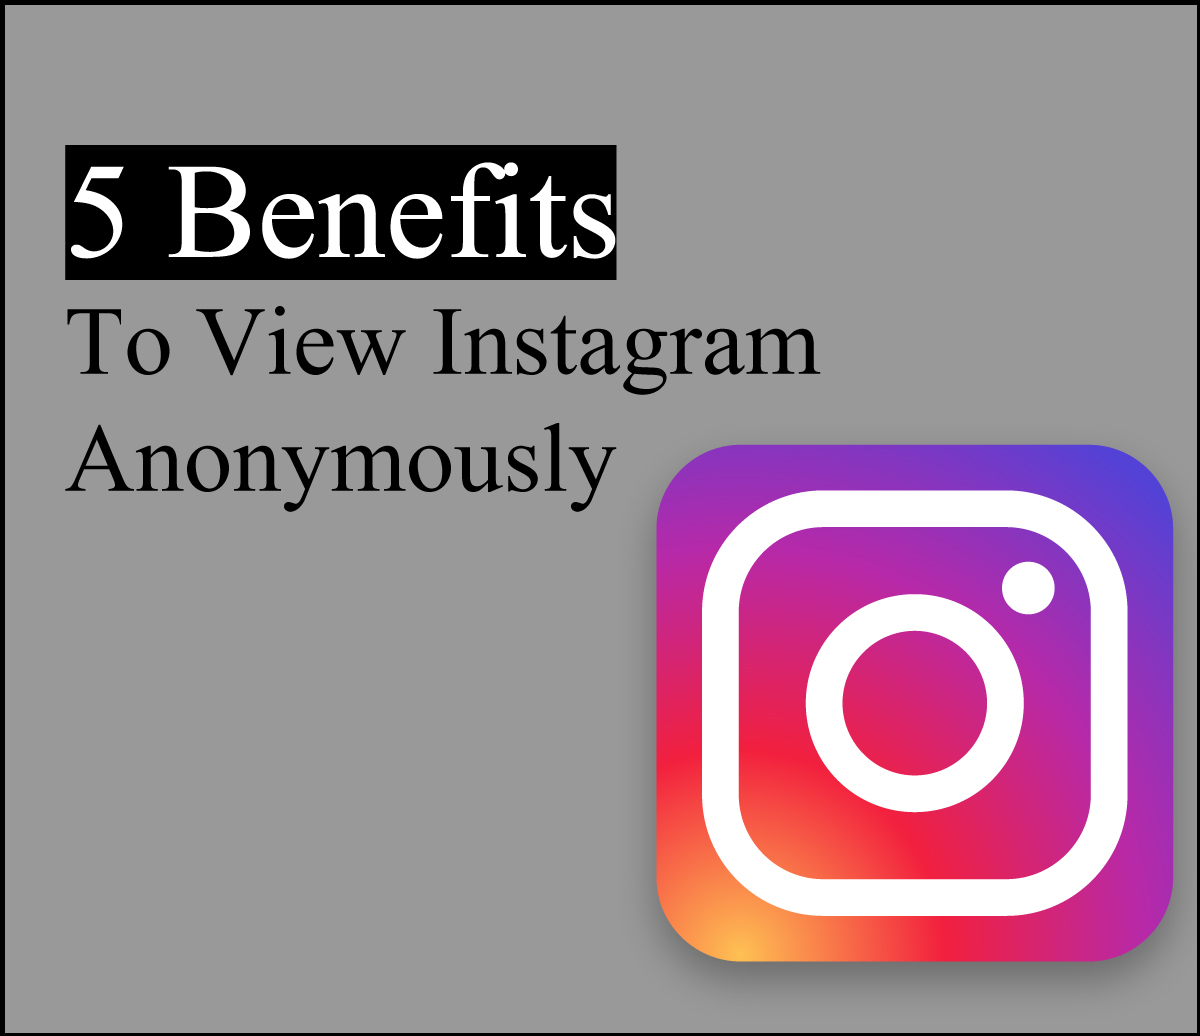 5 Benefits To View Instagram Anonymously